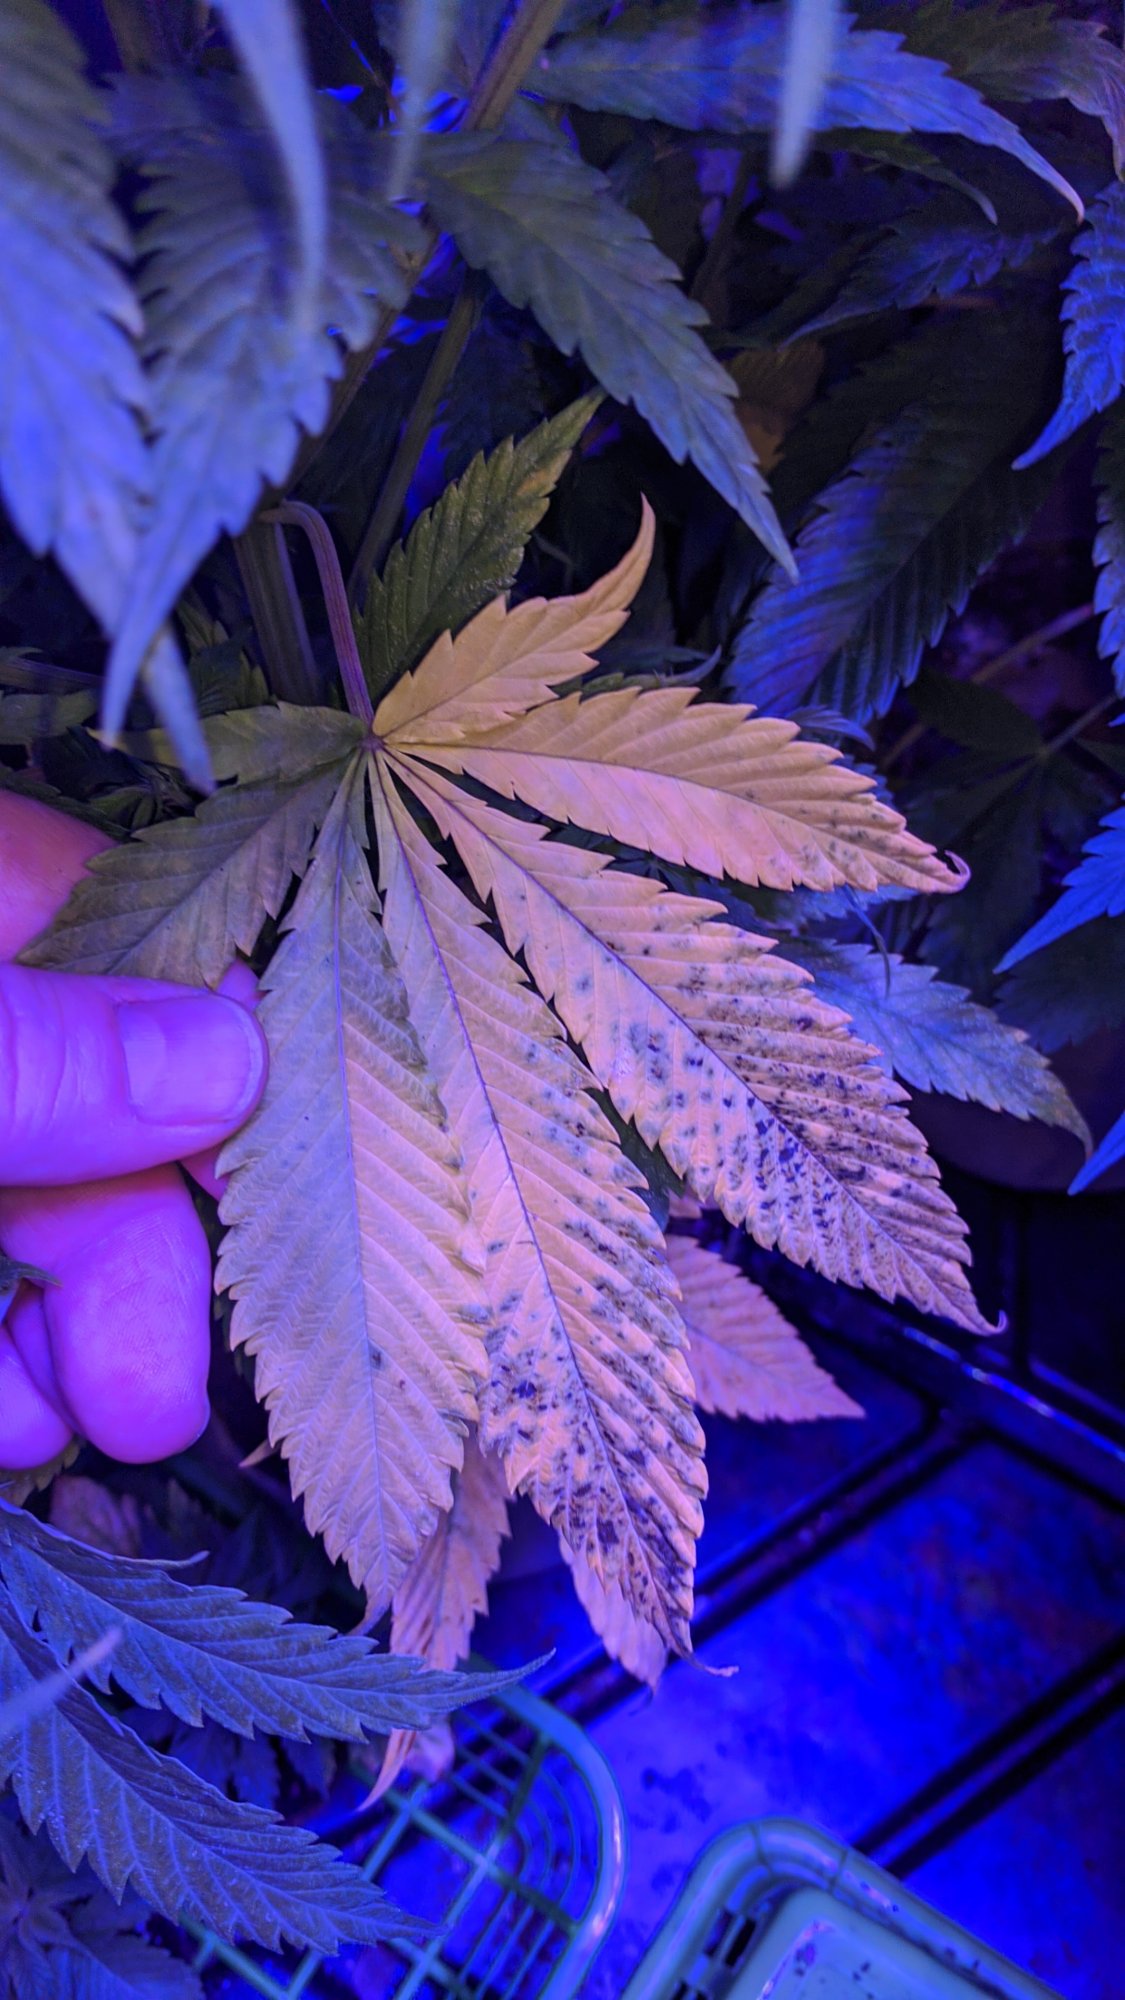 Diagnosis please  lack of light nutes  overwatering  stress whats going on here